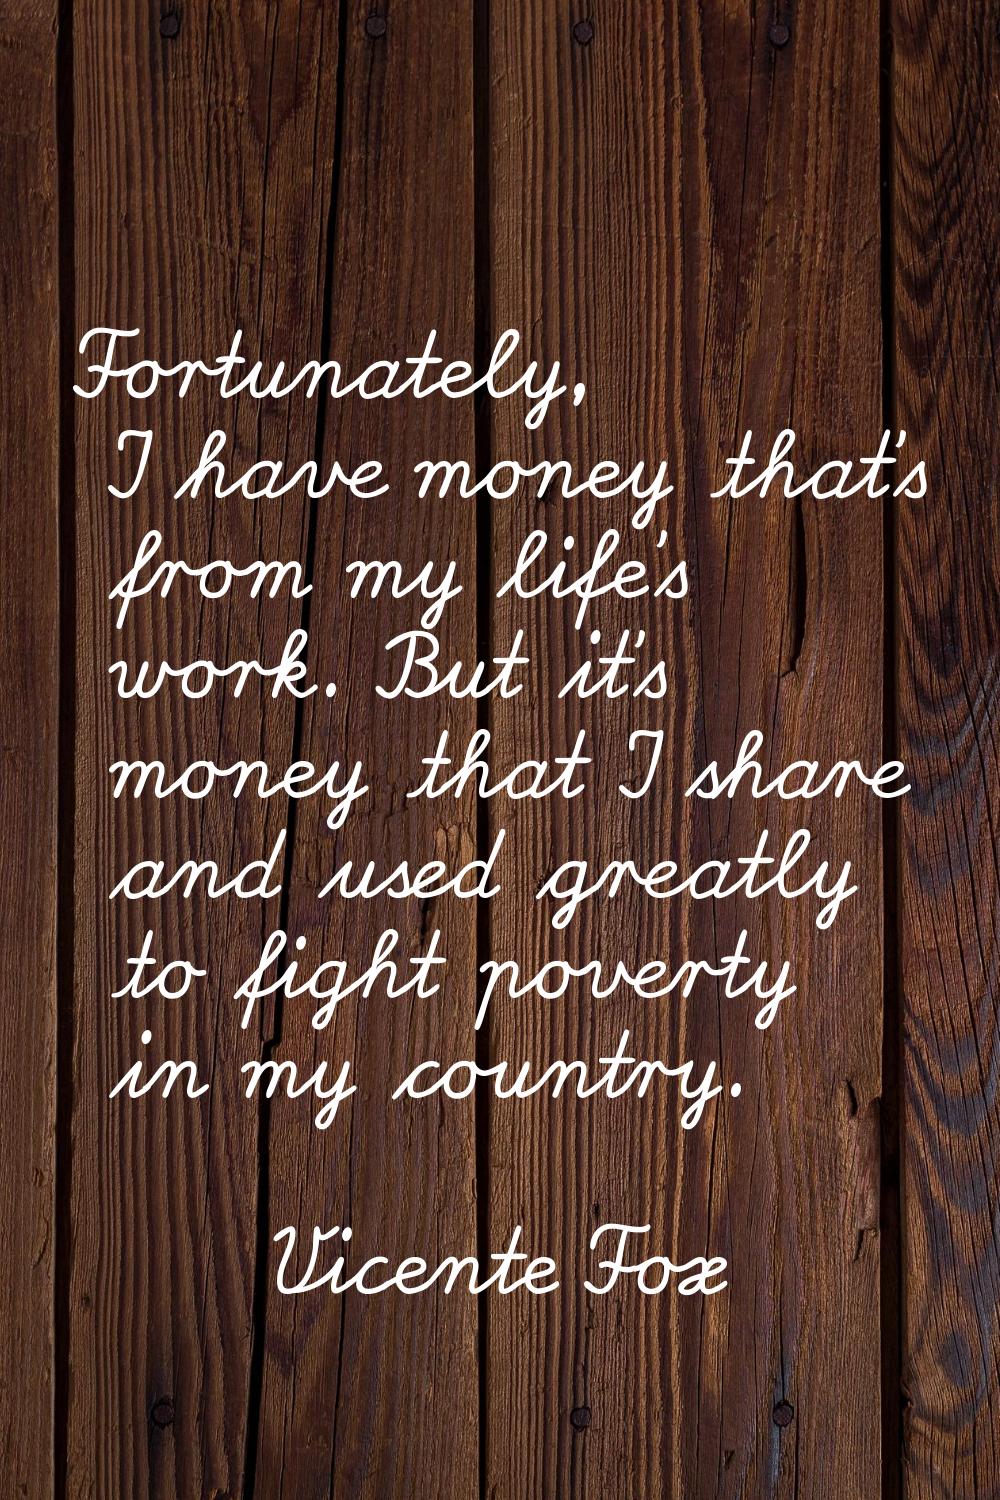 Fortunately, I have money that's from my life's work. But it's money that I share and used greatly 